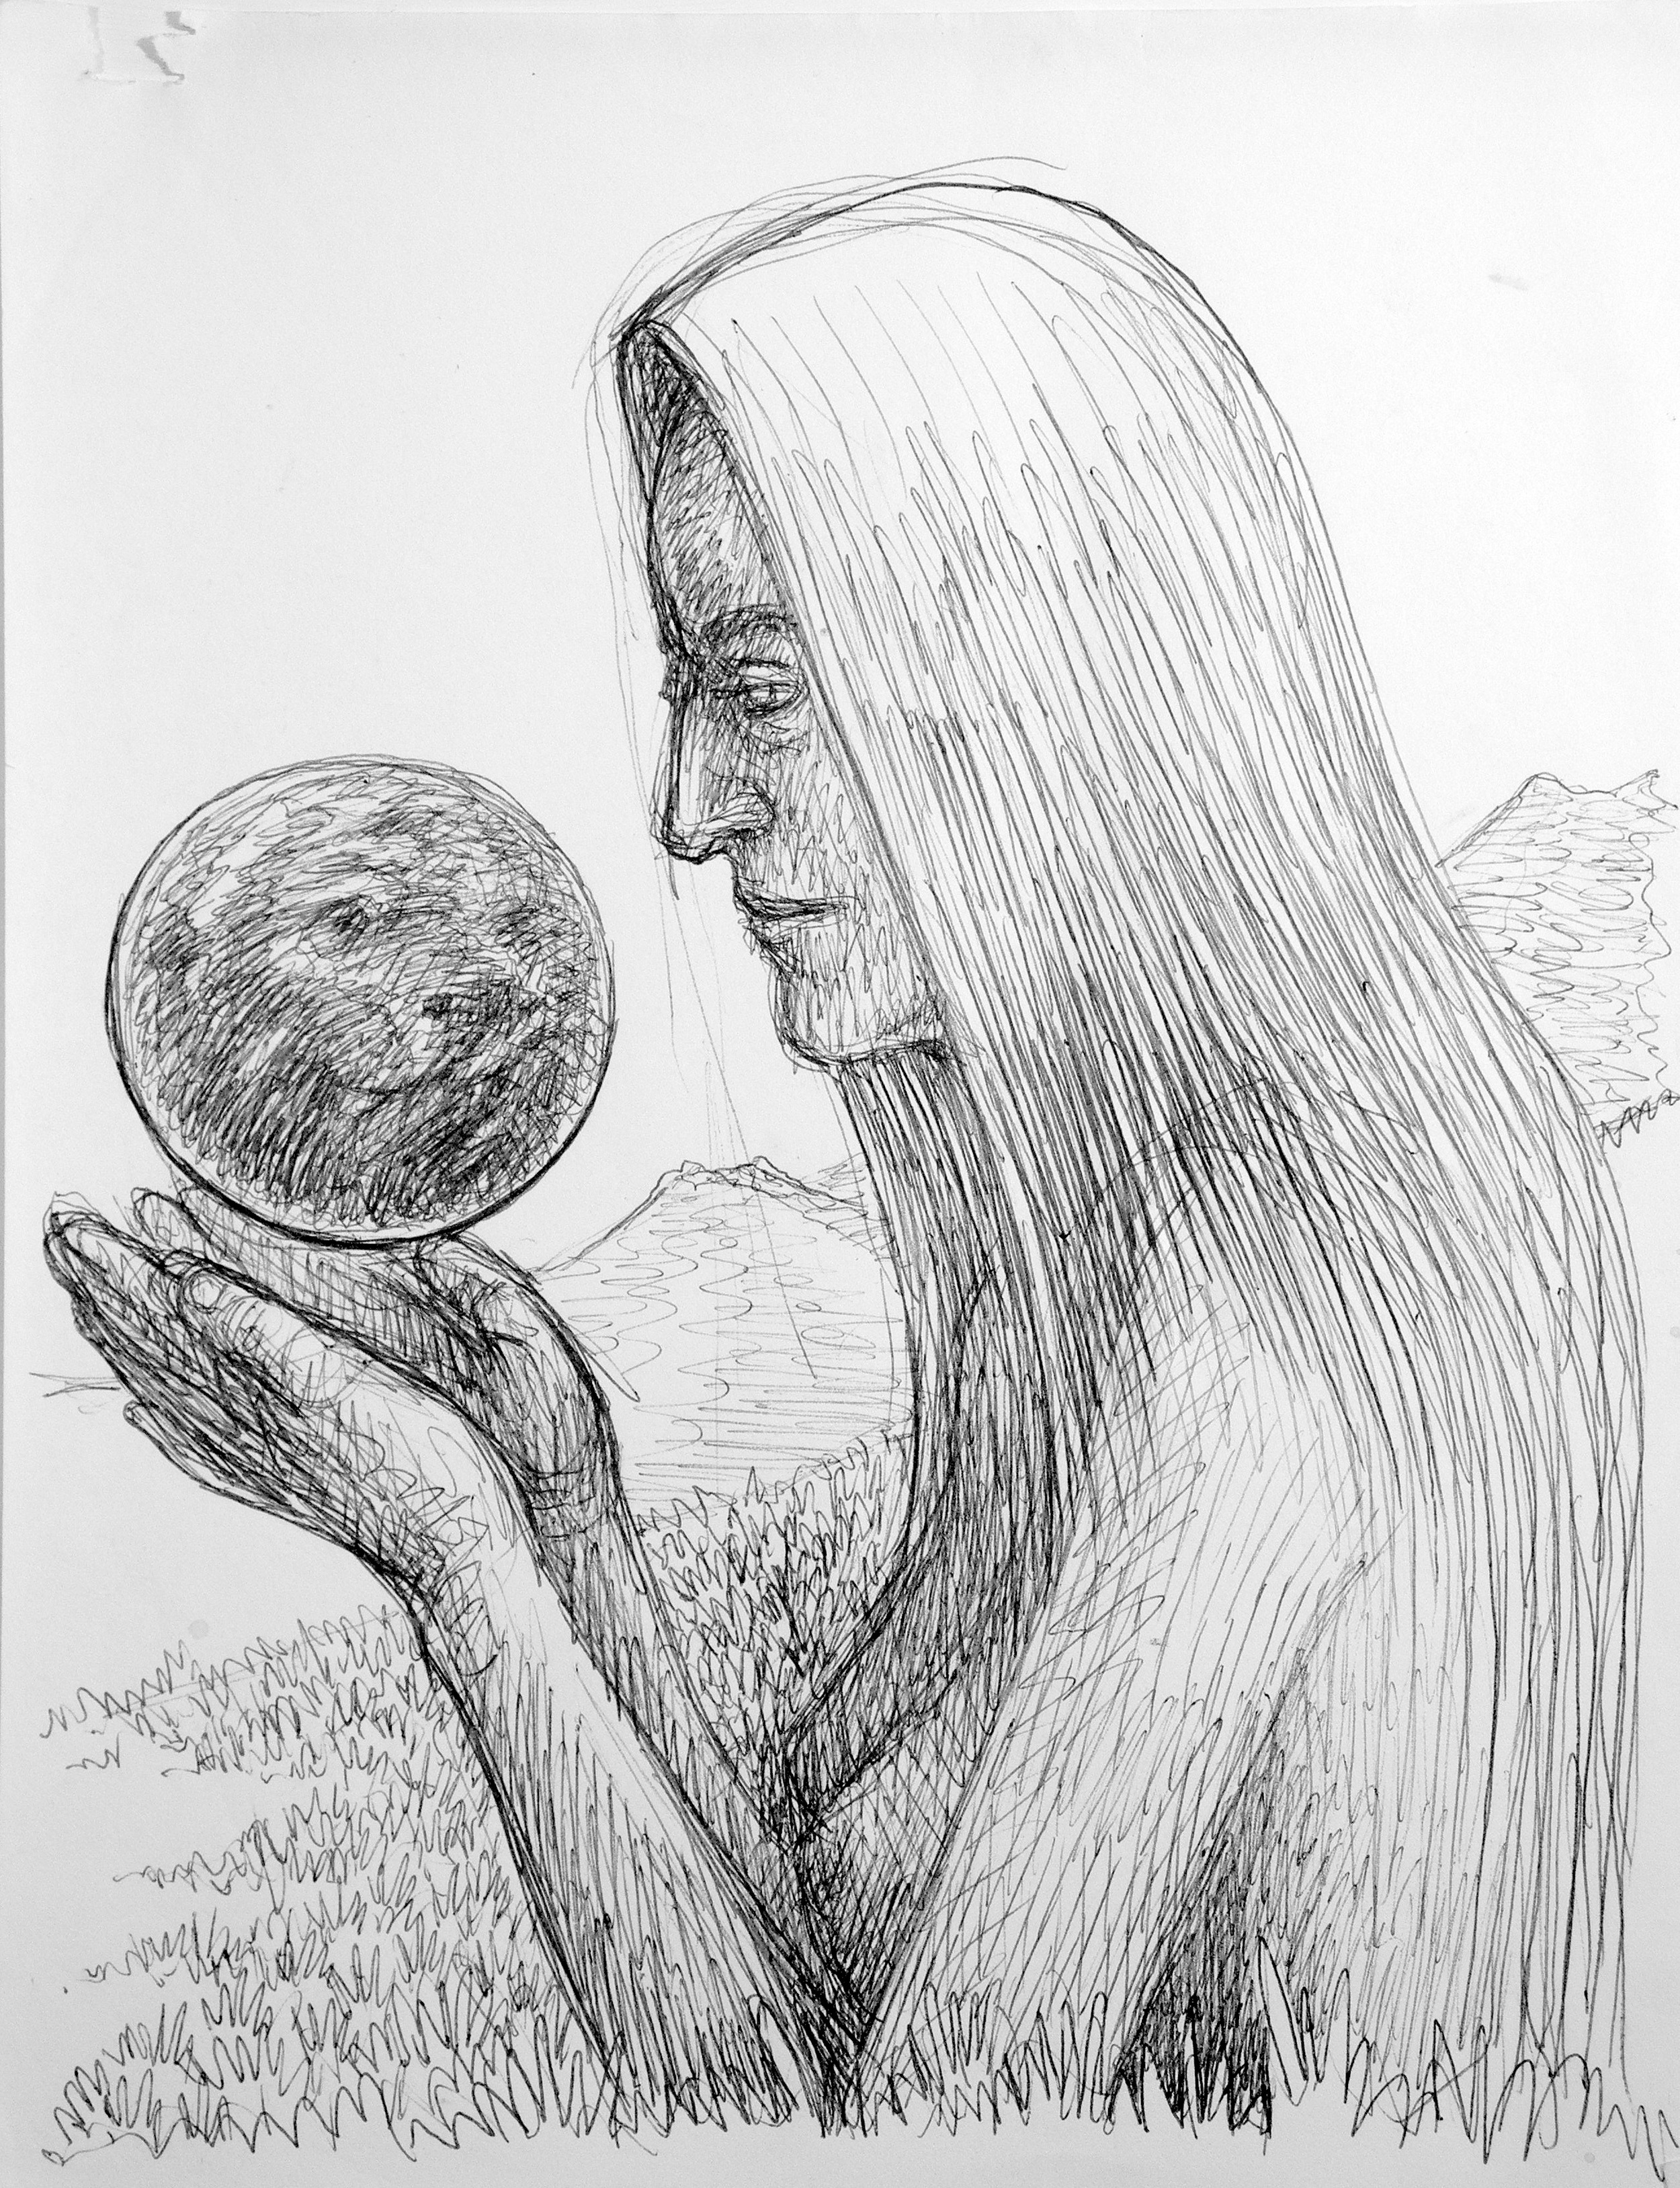 "Earth Mother" by Vernon Courtlandt Johnson. © 2000 VCJ. All rights reserved.